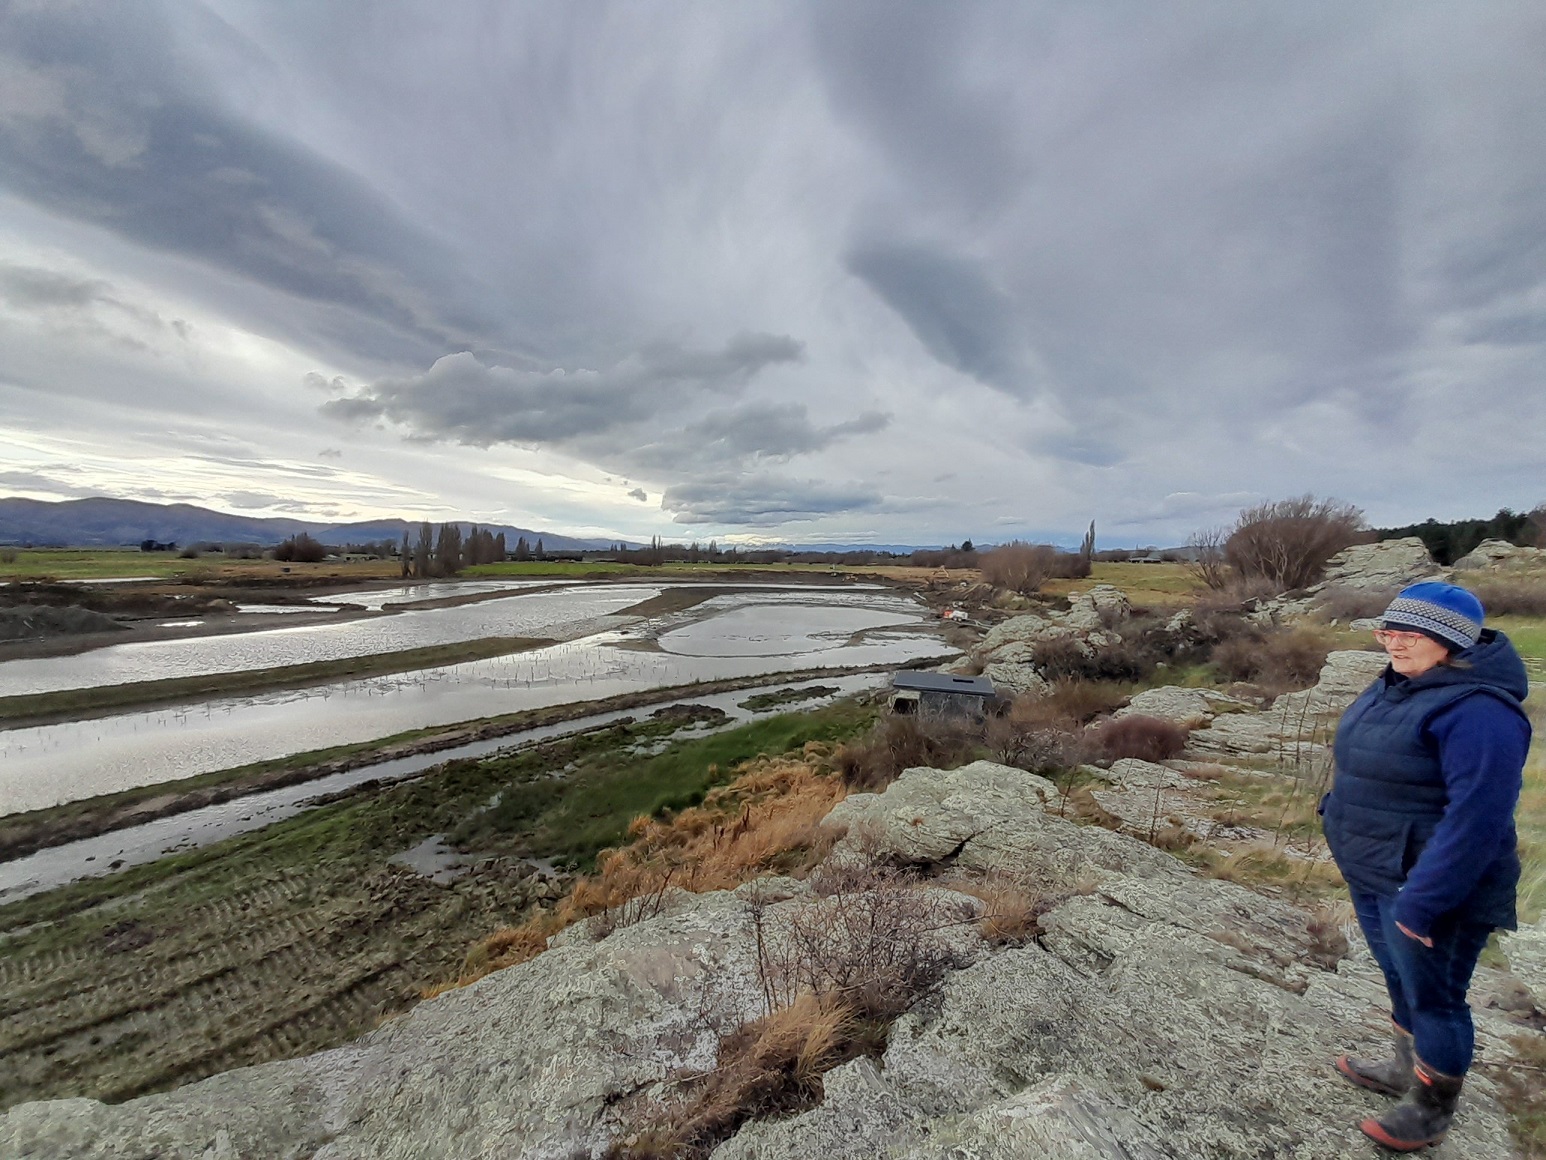 Nicola McGrouther looks out over the Thomsons Creek wetland. Photo: Central Otago News